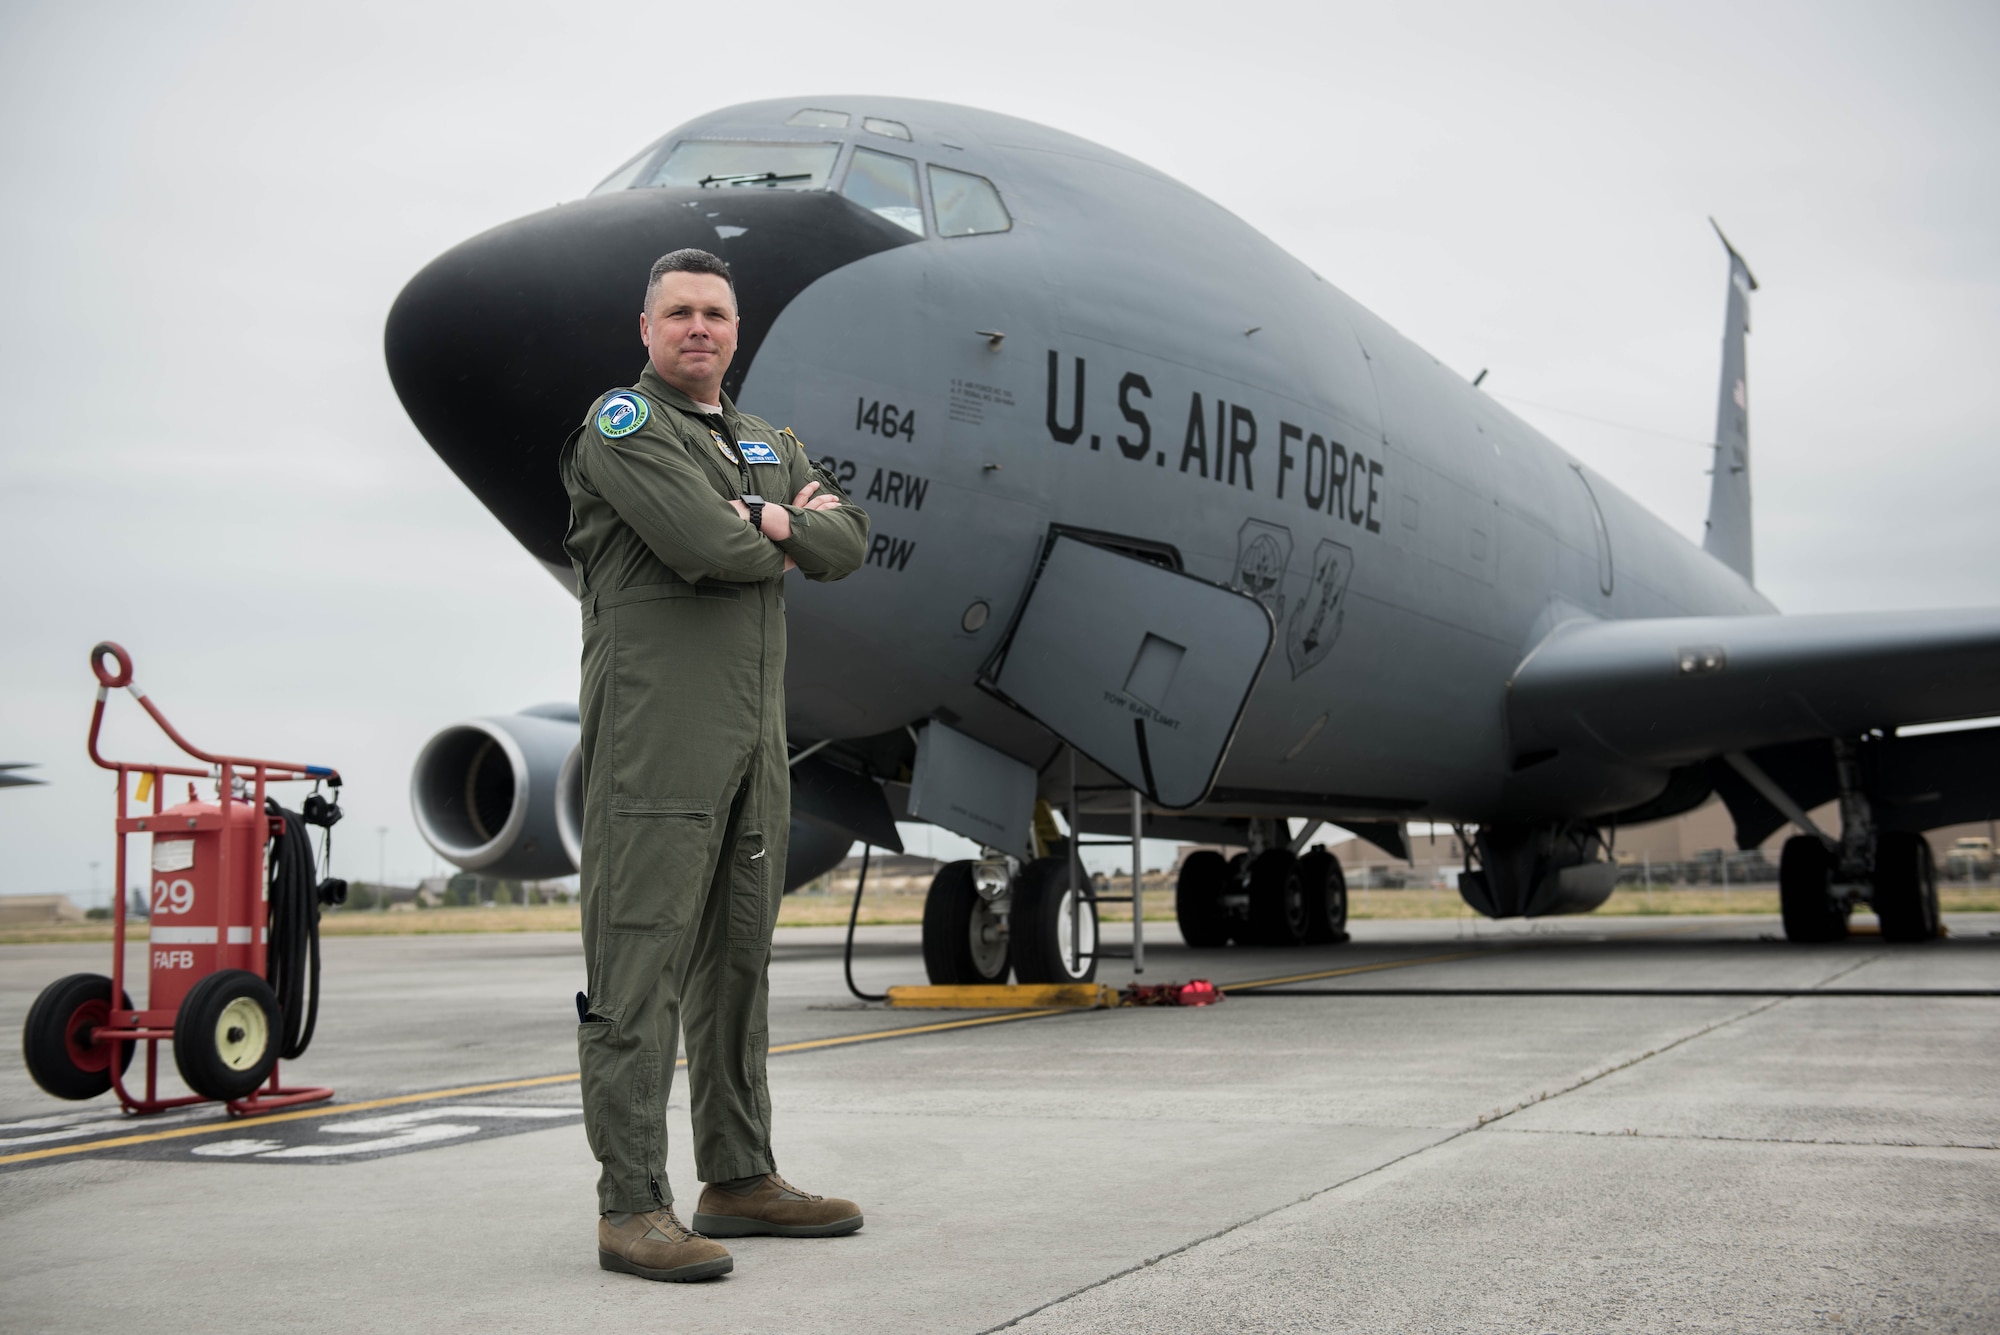 Col. Matthew Fritz, 92nd Air Refueling Wing vice commander, poses in front of a KC-135 Stratotanker before departing on his final flight as vice commander June 15, 2017, at Fairchild Air Force Base, Washington. Fritz has published several books and actively writes about leadership for several online publications. (U.S. Air Force photo/Senior Airman Sean Campbell)